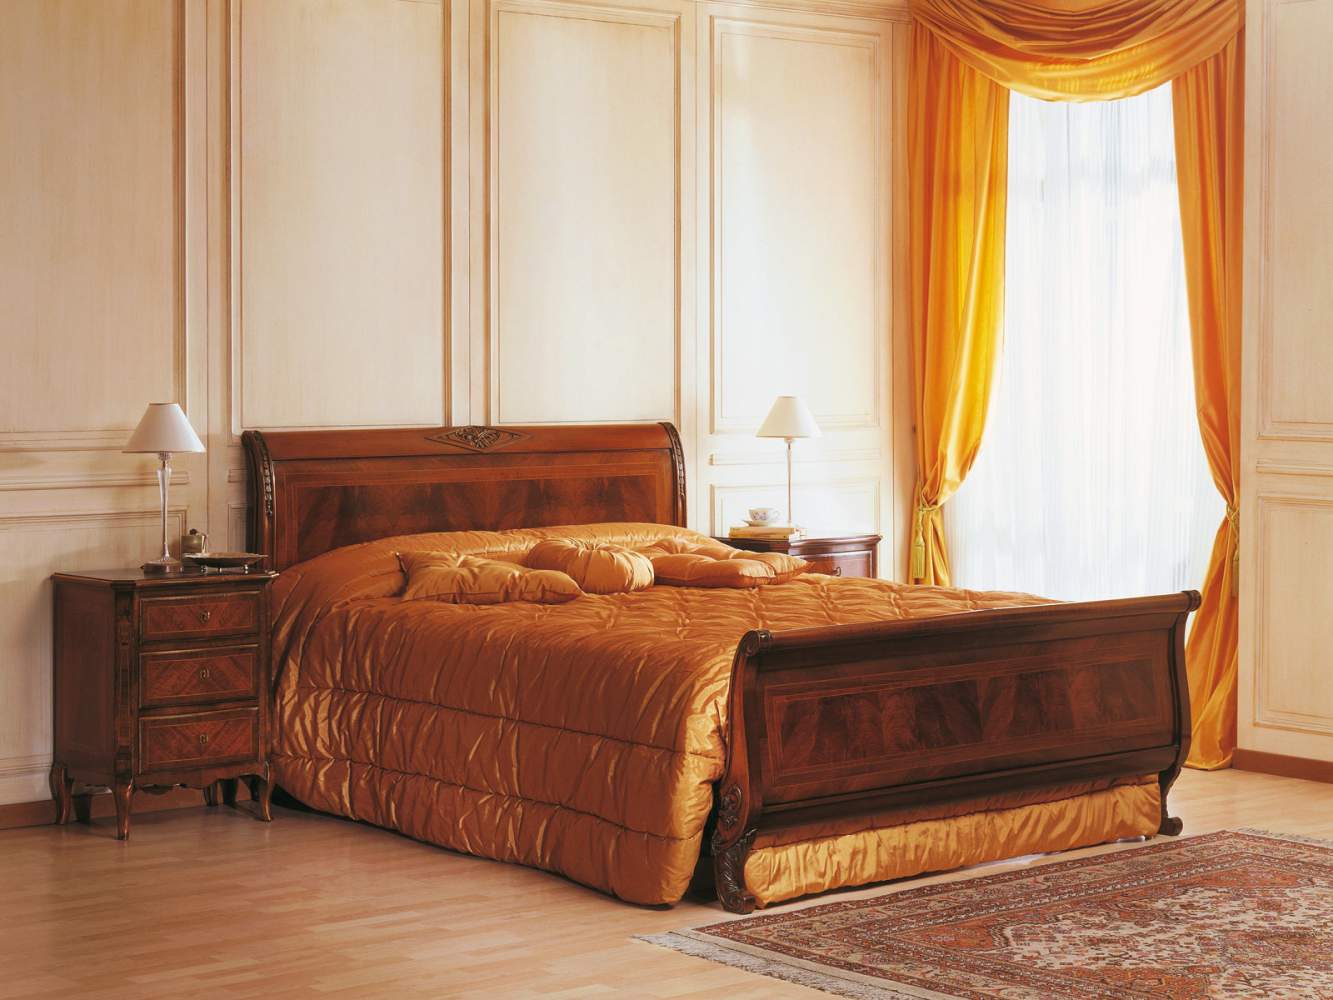 French style bedroom of the Nineteenth Century with bed and night tables inlaid walnut